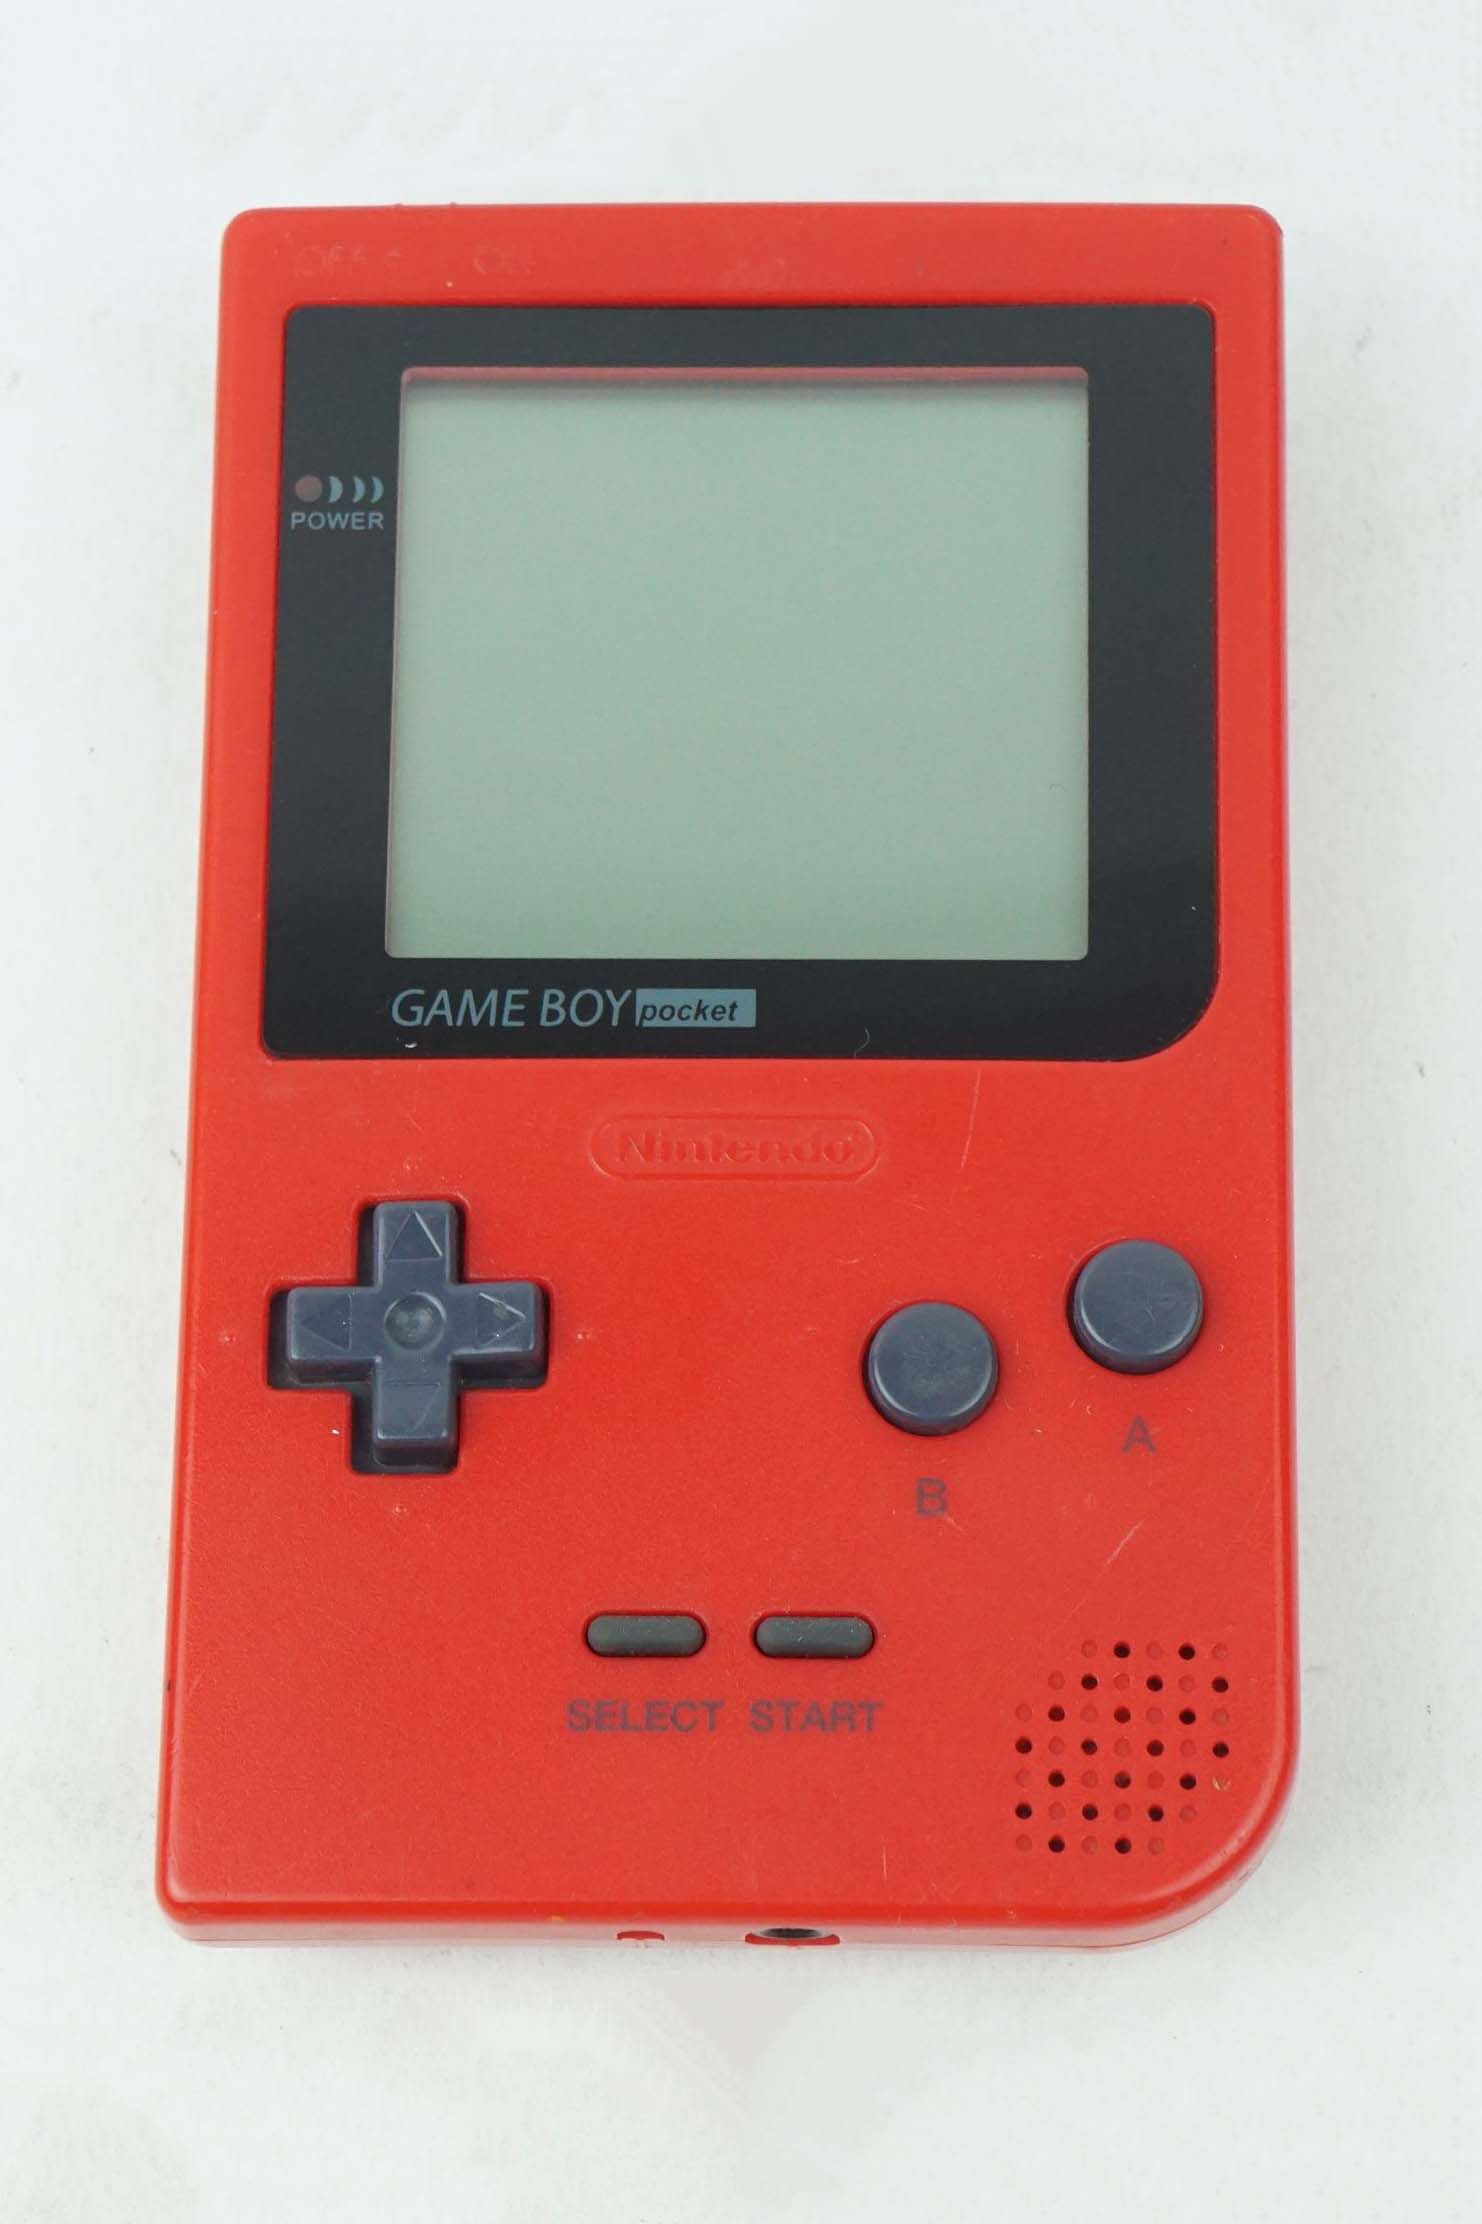 Thirty Years Ago, Game Boy Changed the Way America Played Video Games, Innovation